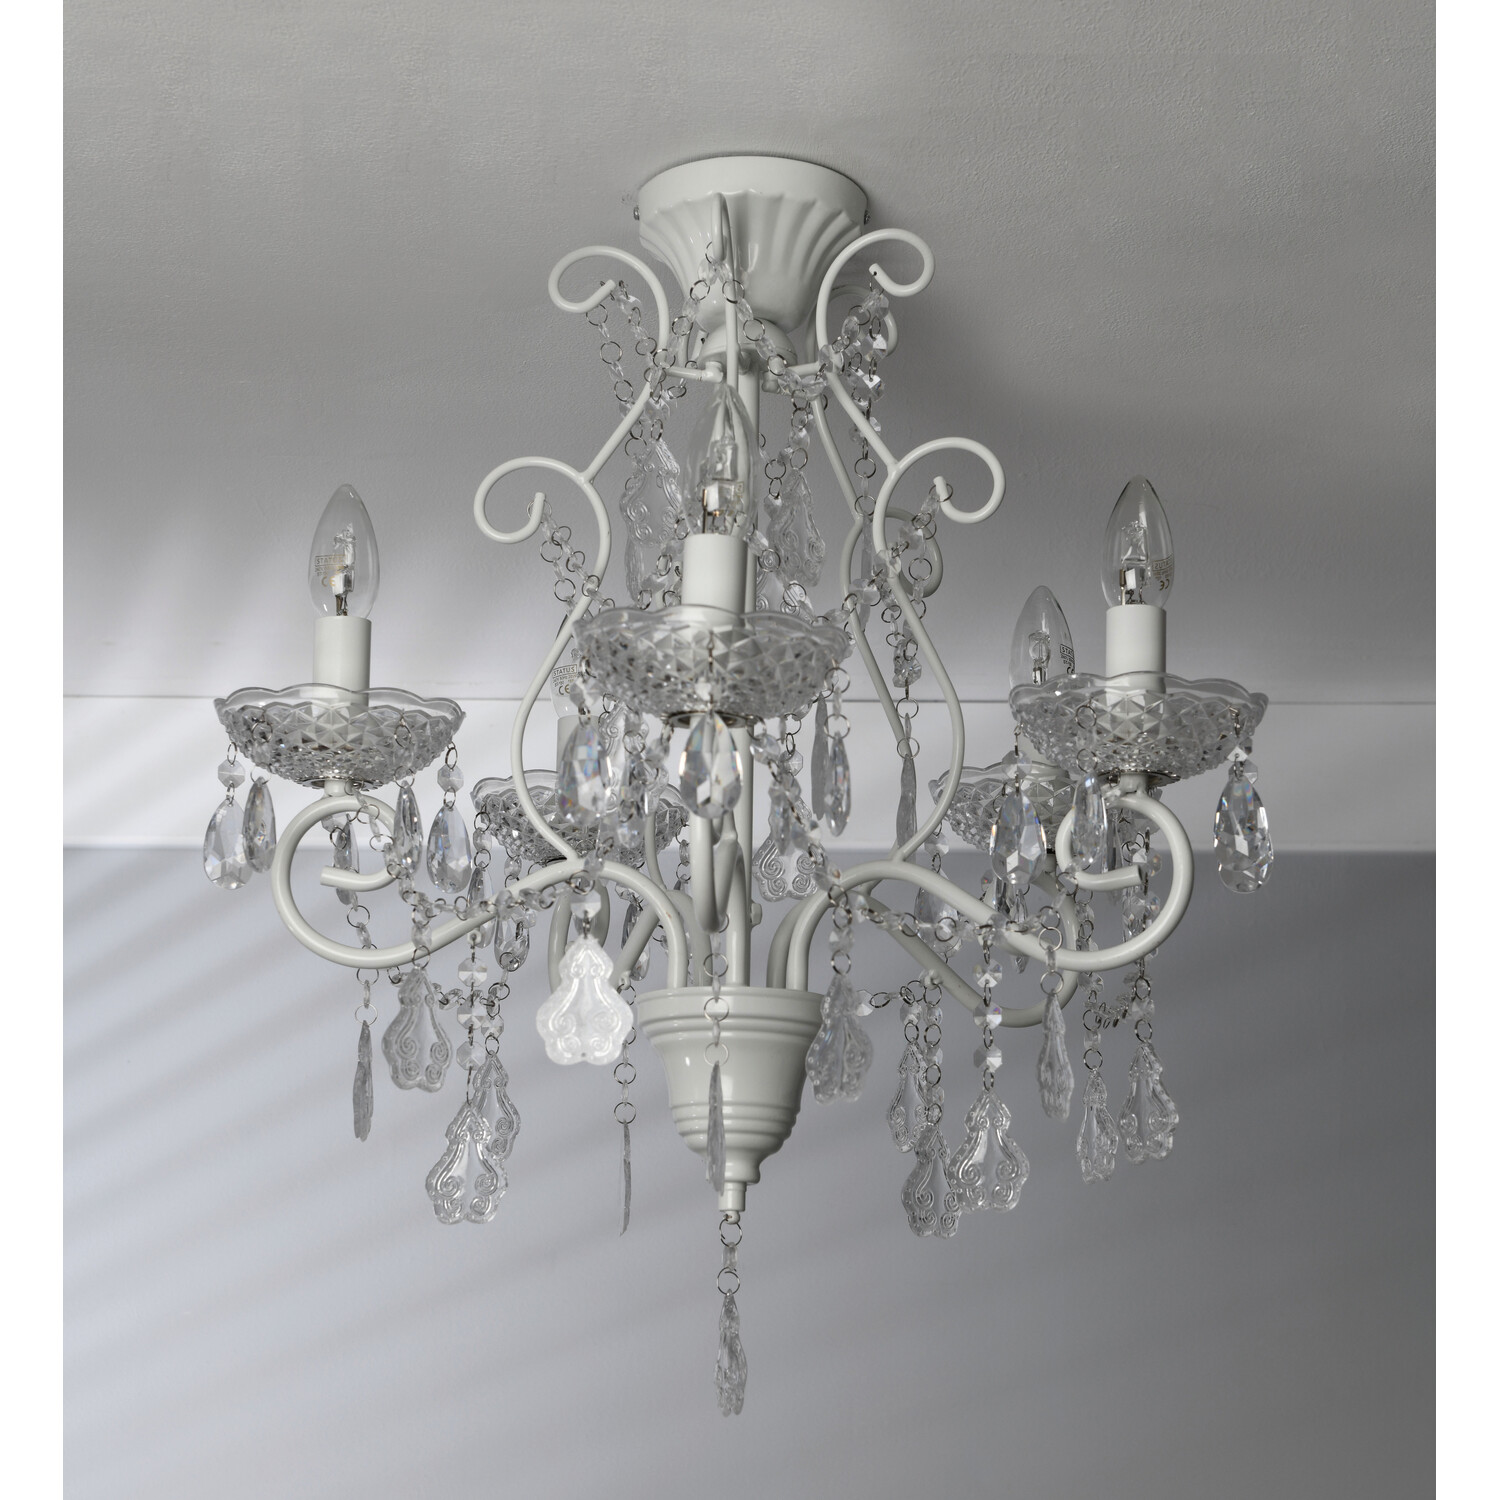 White Antiqued Jewelled Ceiling Chandelier Image 4